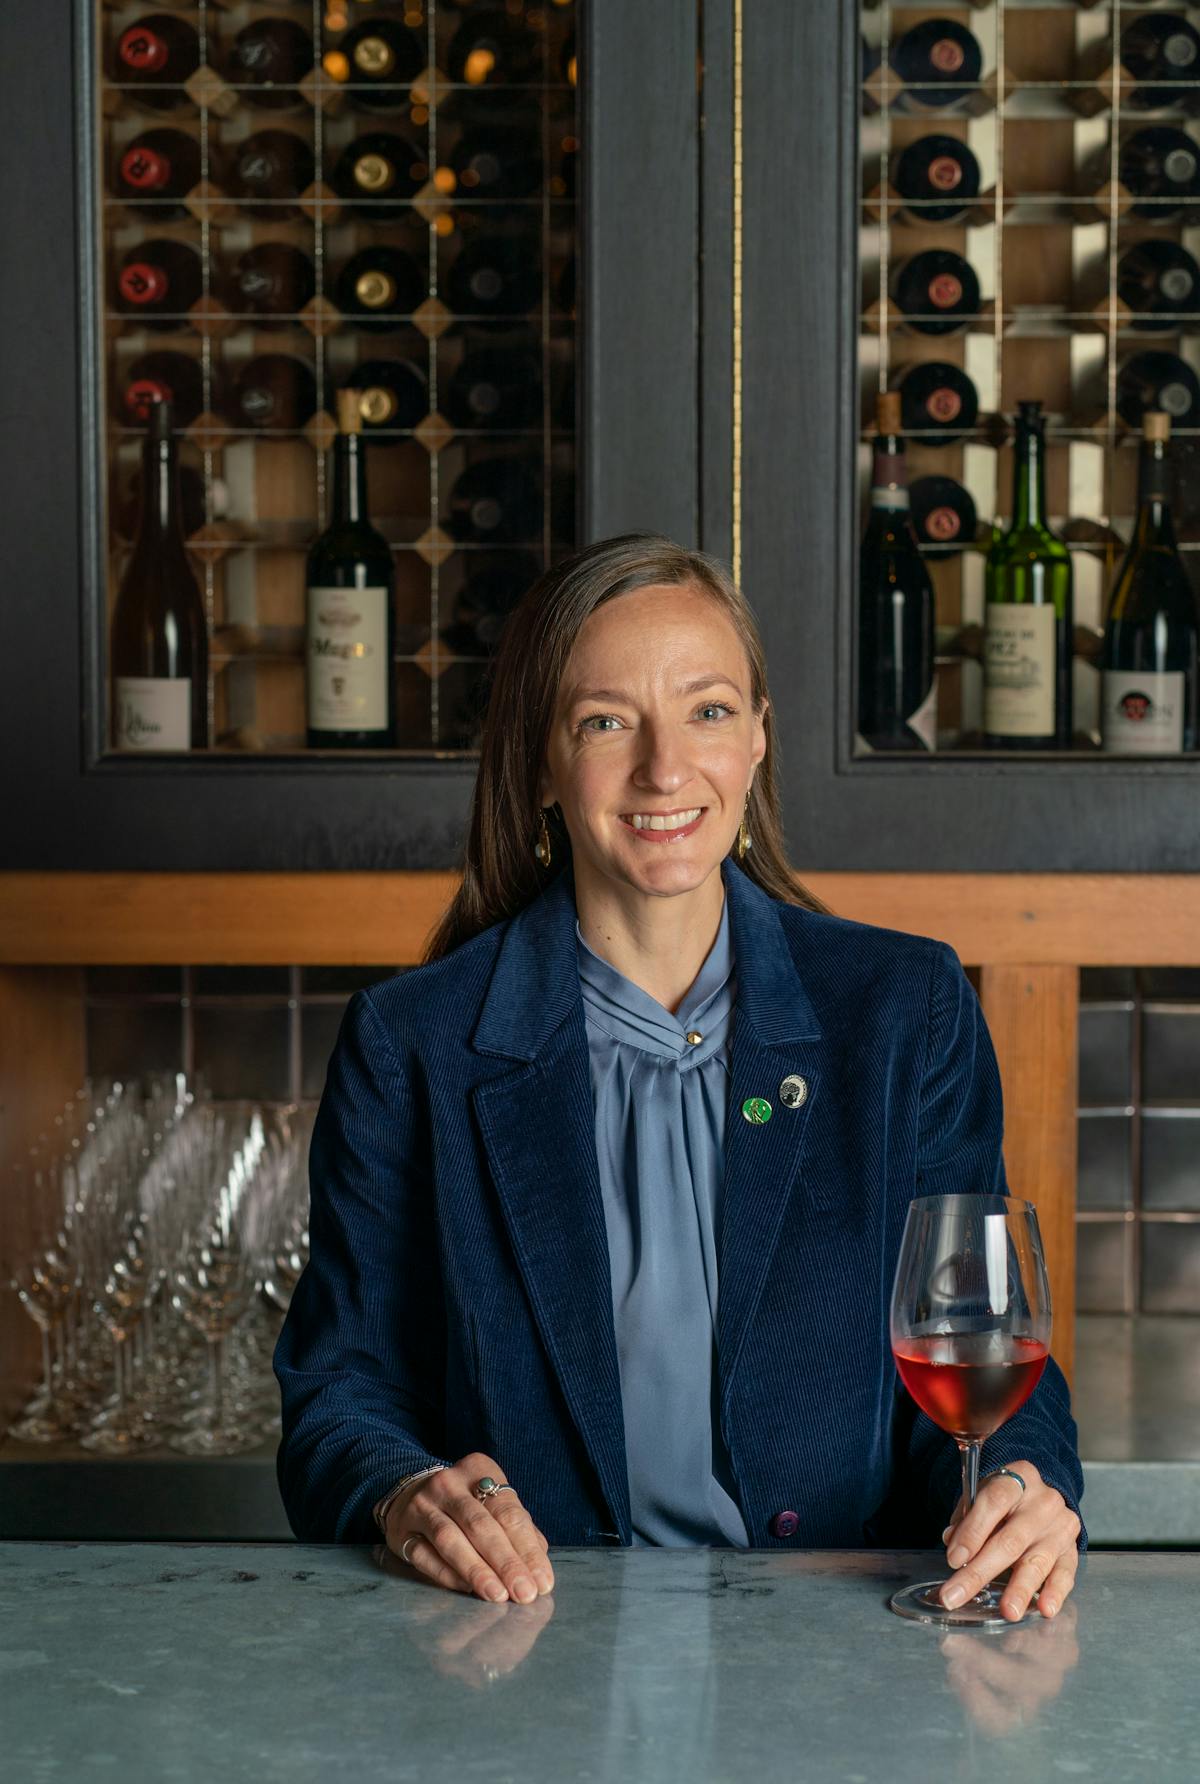 a person sitting at a table with wine glasses and smiling at the camera